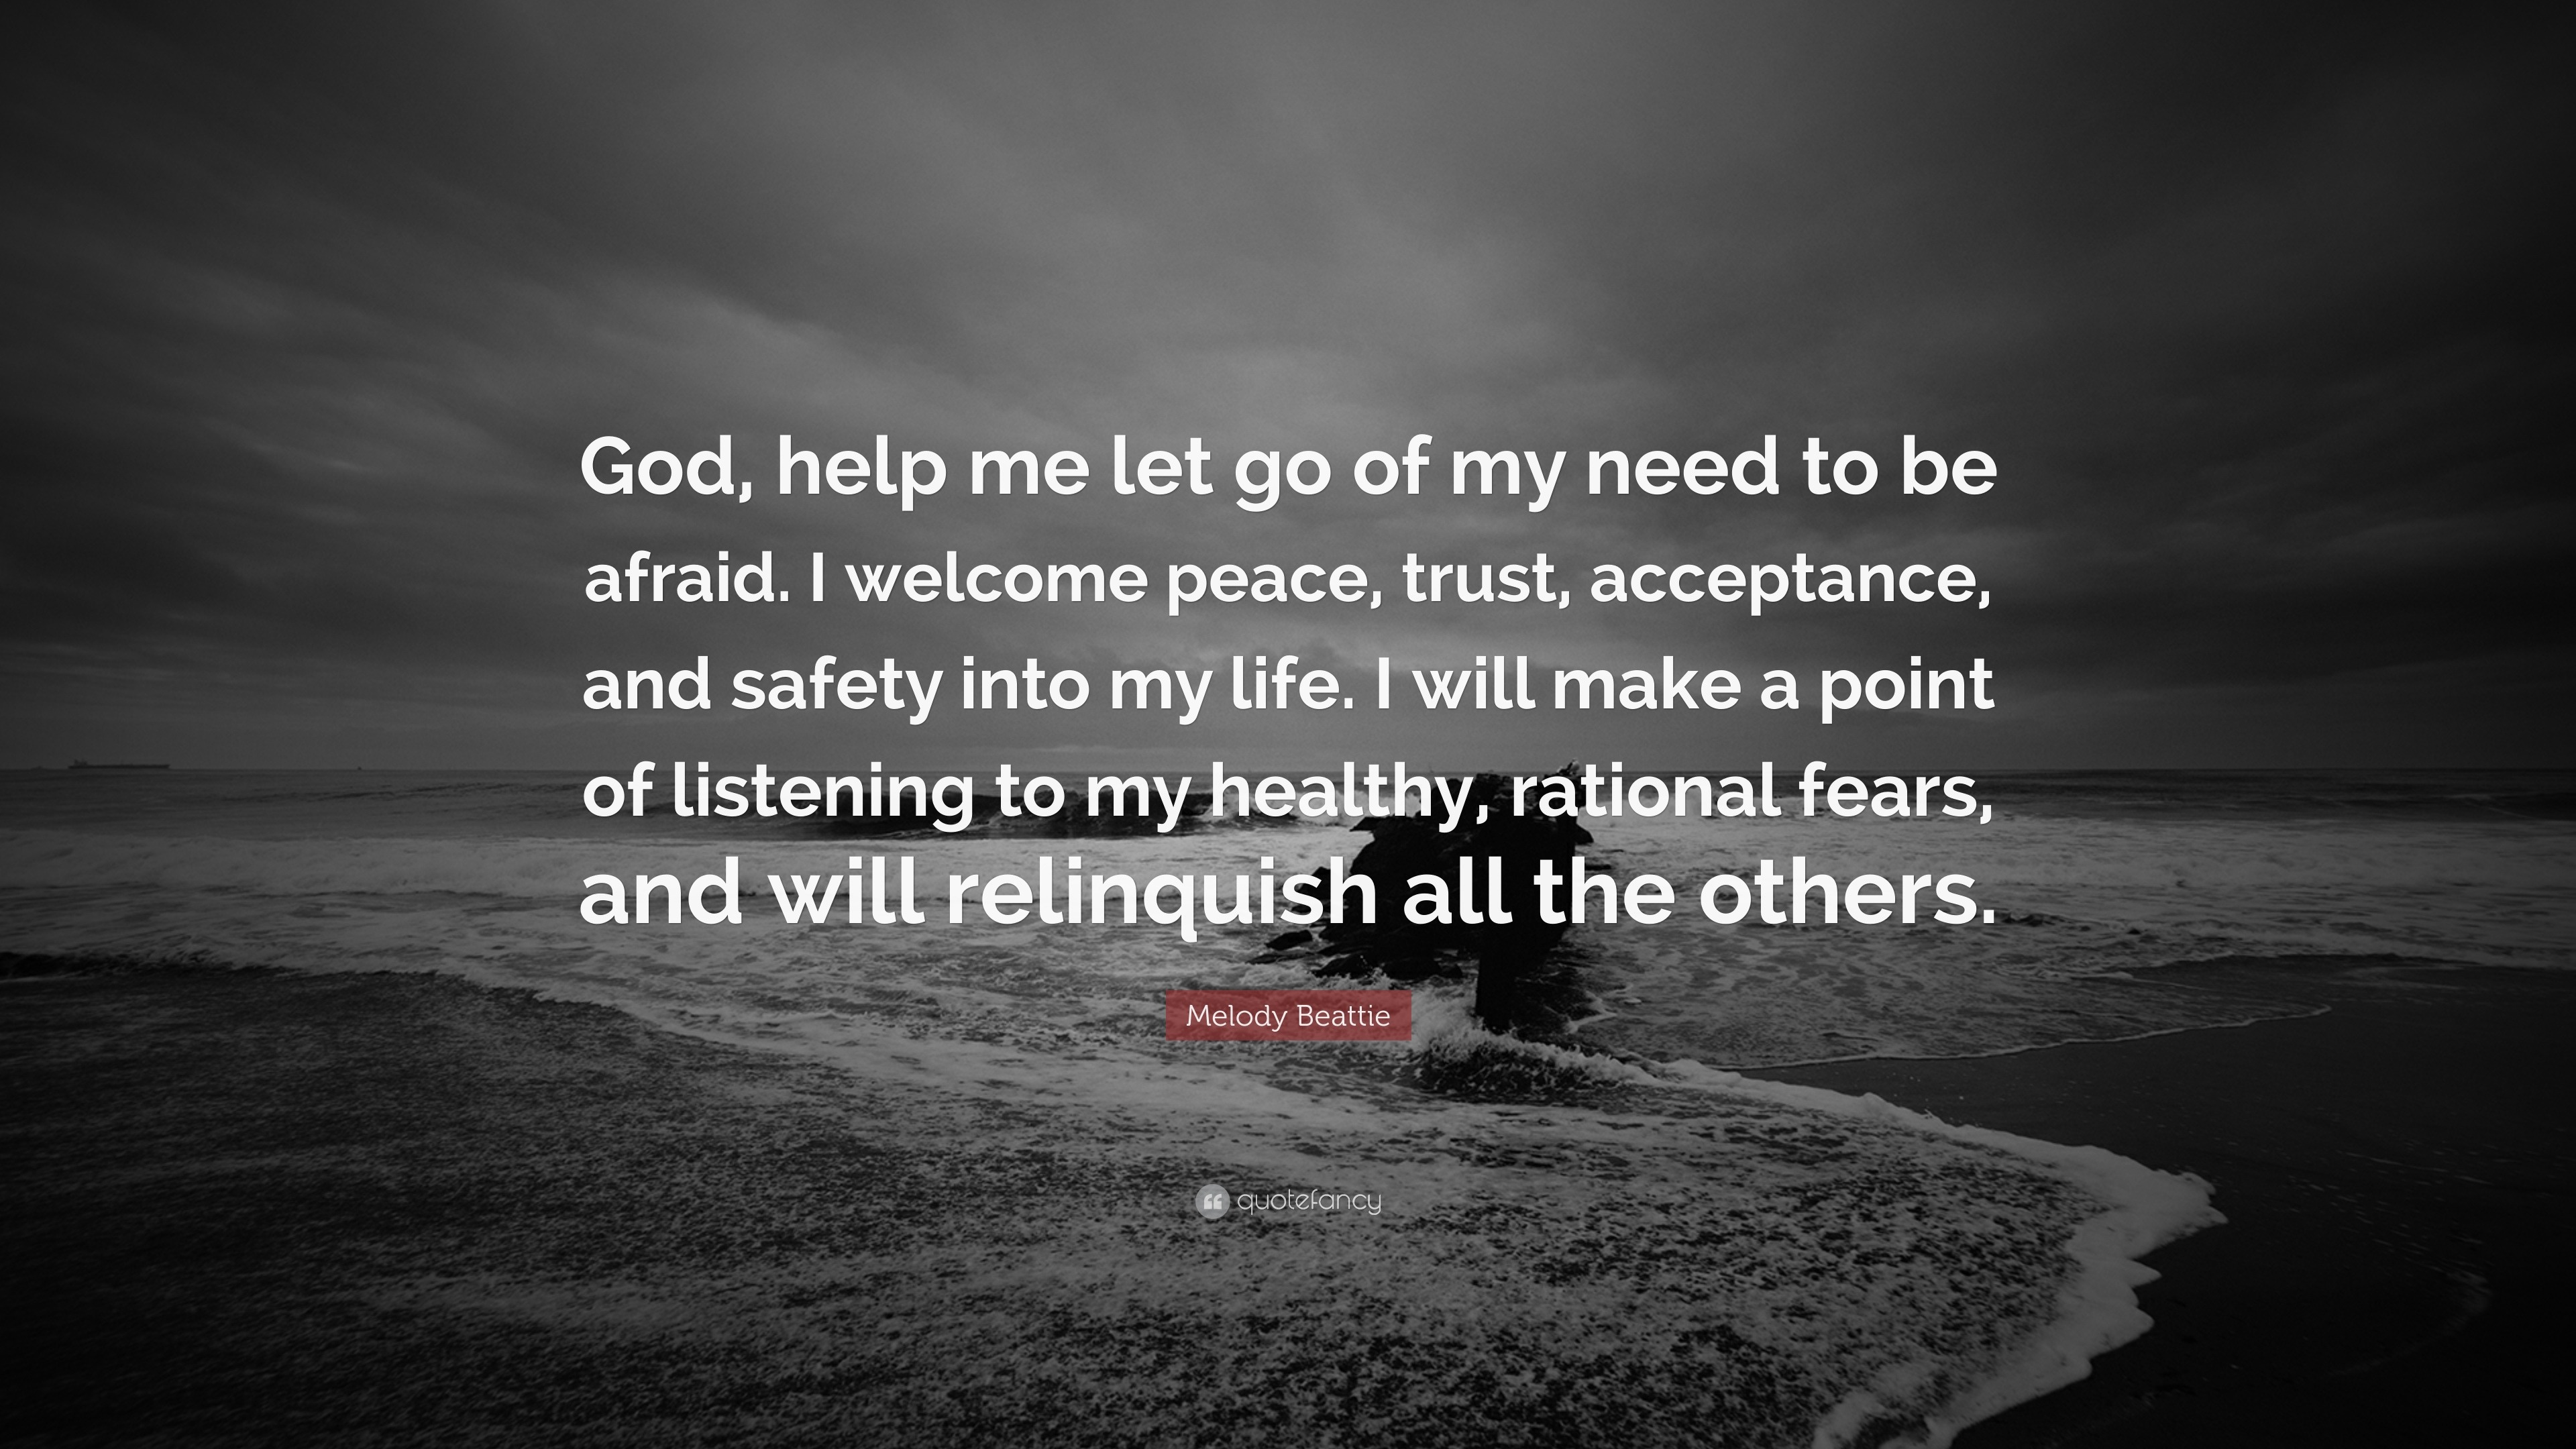 melody beattie quote: “god, help me let go of my need to be afraid